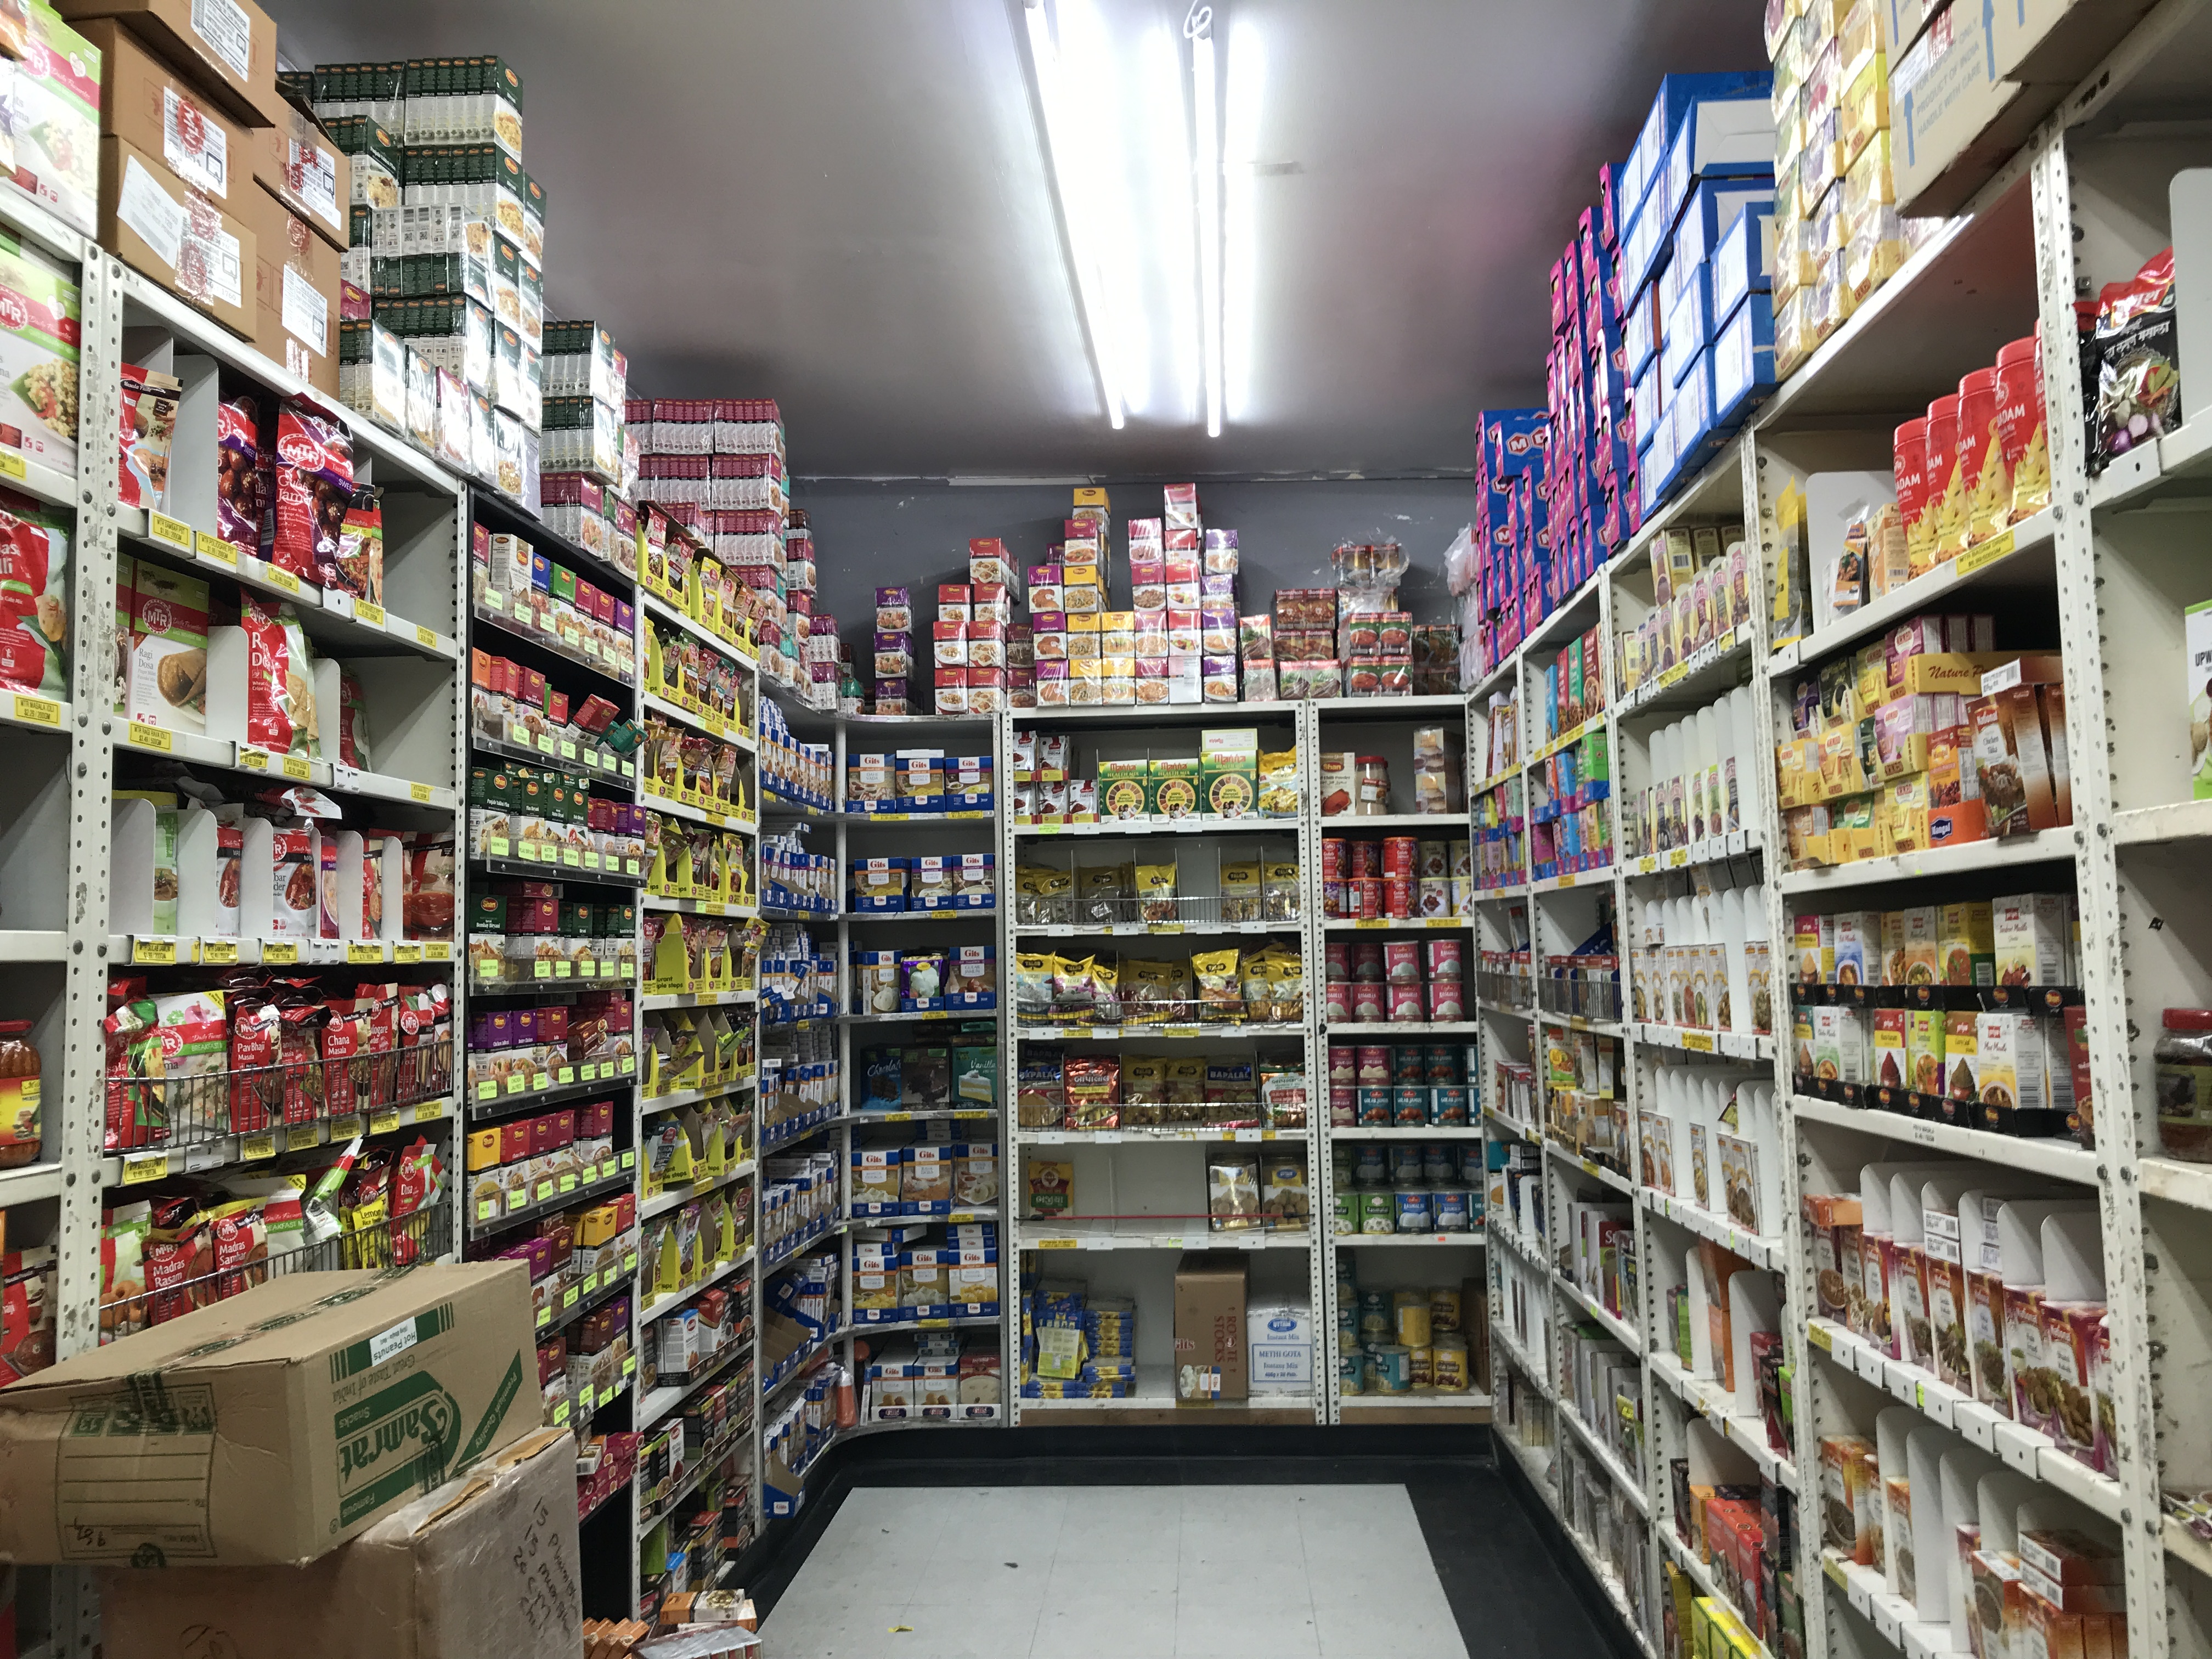 An aisle of an Indian grocery store with many colorful spice containers on the racks. India Square, Journal Square, Jersey City, New Jersey, United States of America